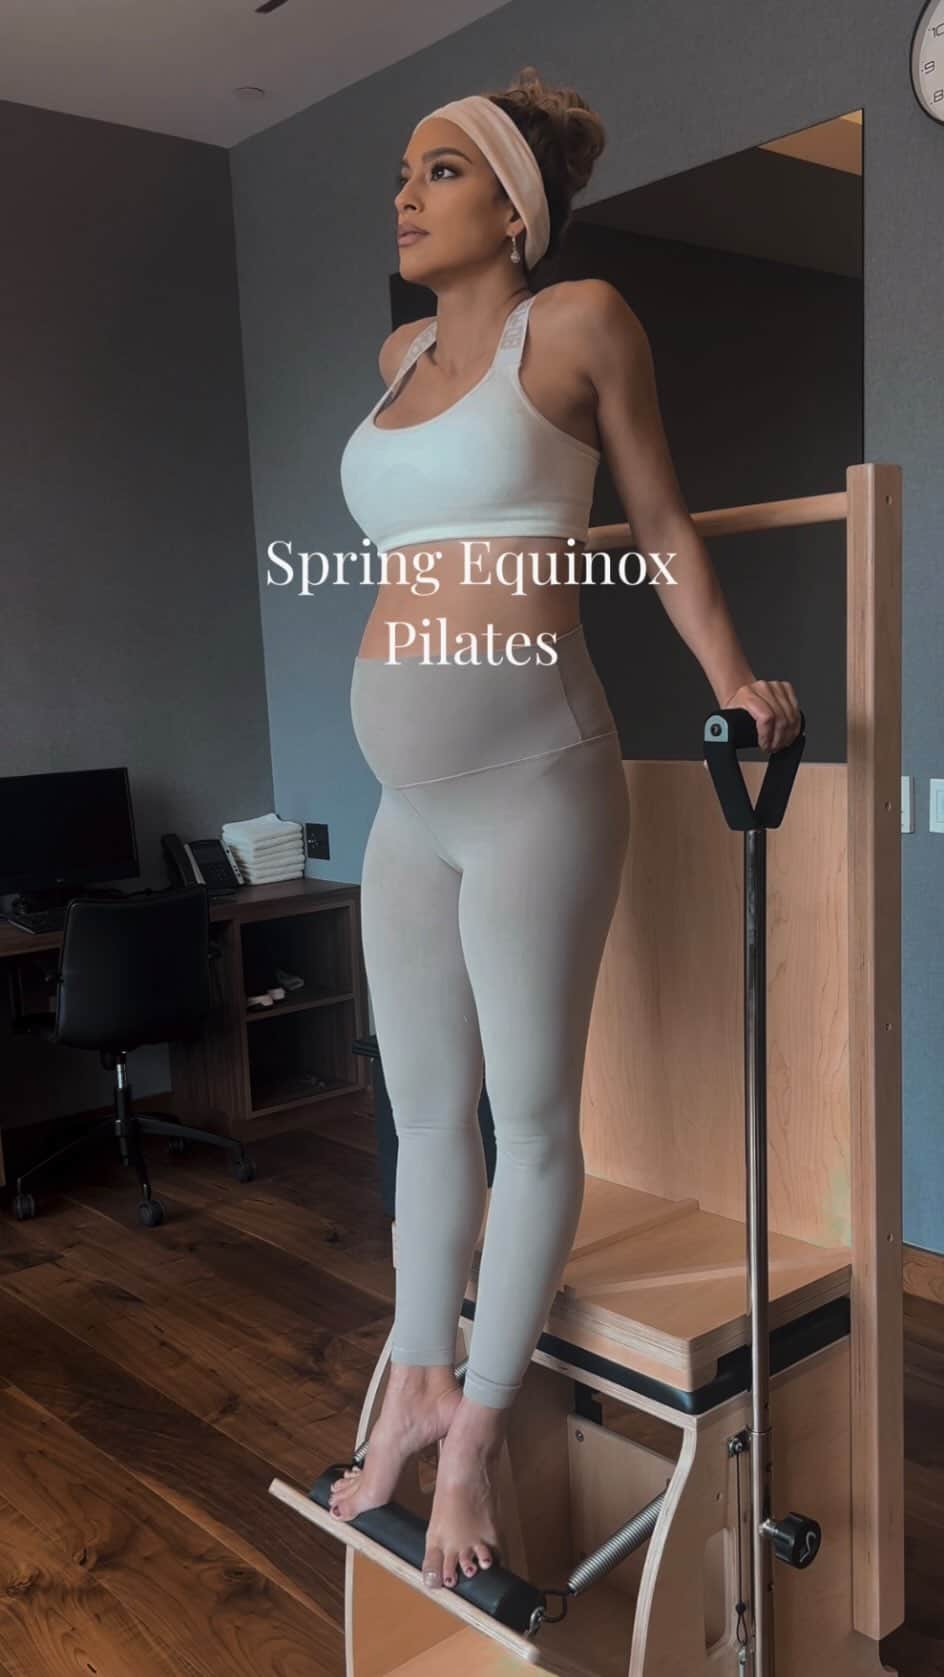 Sarah Mundoのインスタグラム：「Spring Equinox at Equinox  Springing into action with Pilates reformer and loved it 🤎 Movement is so important during pregnancy   #pilates #lifestyle #healthy #equinox #springEquinox」